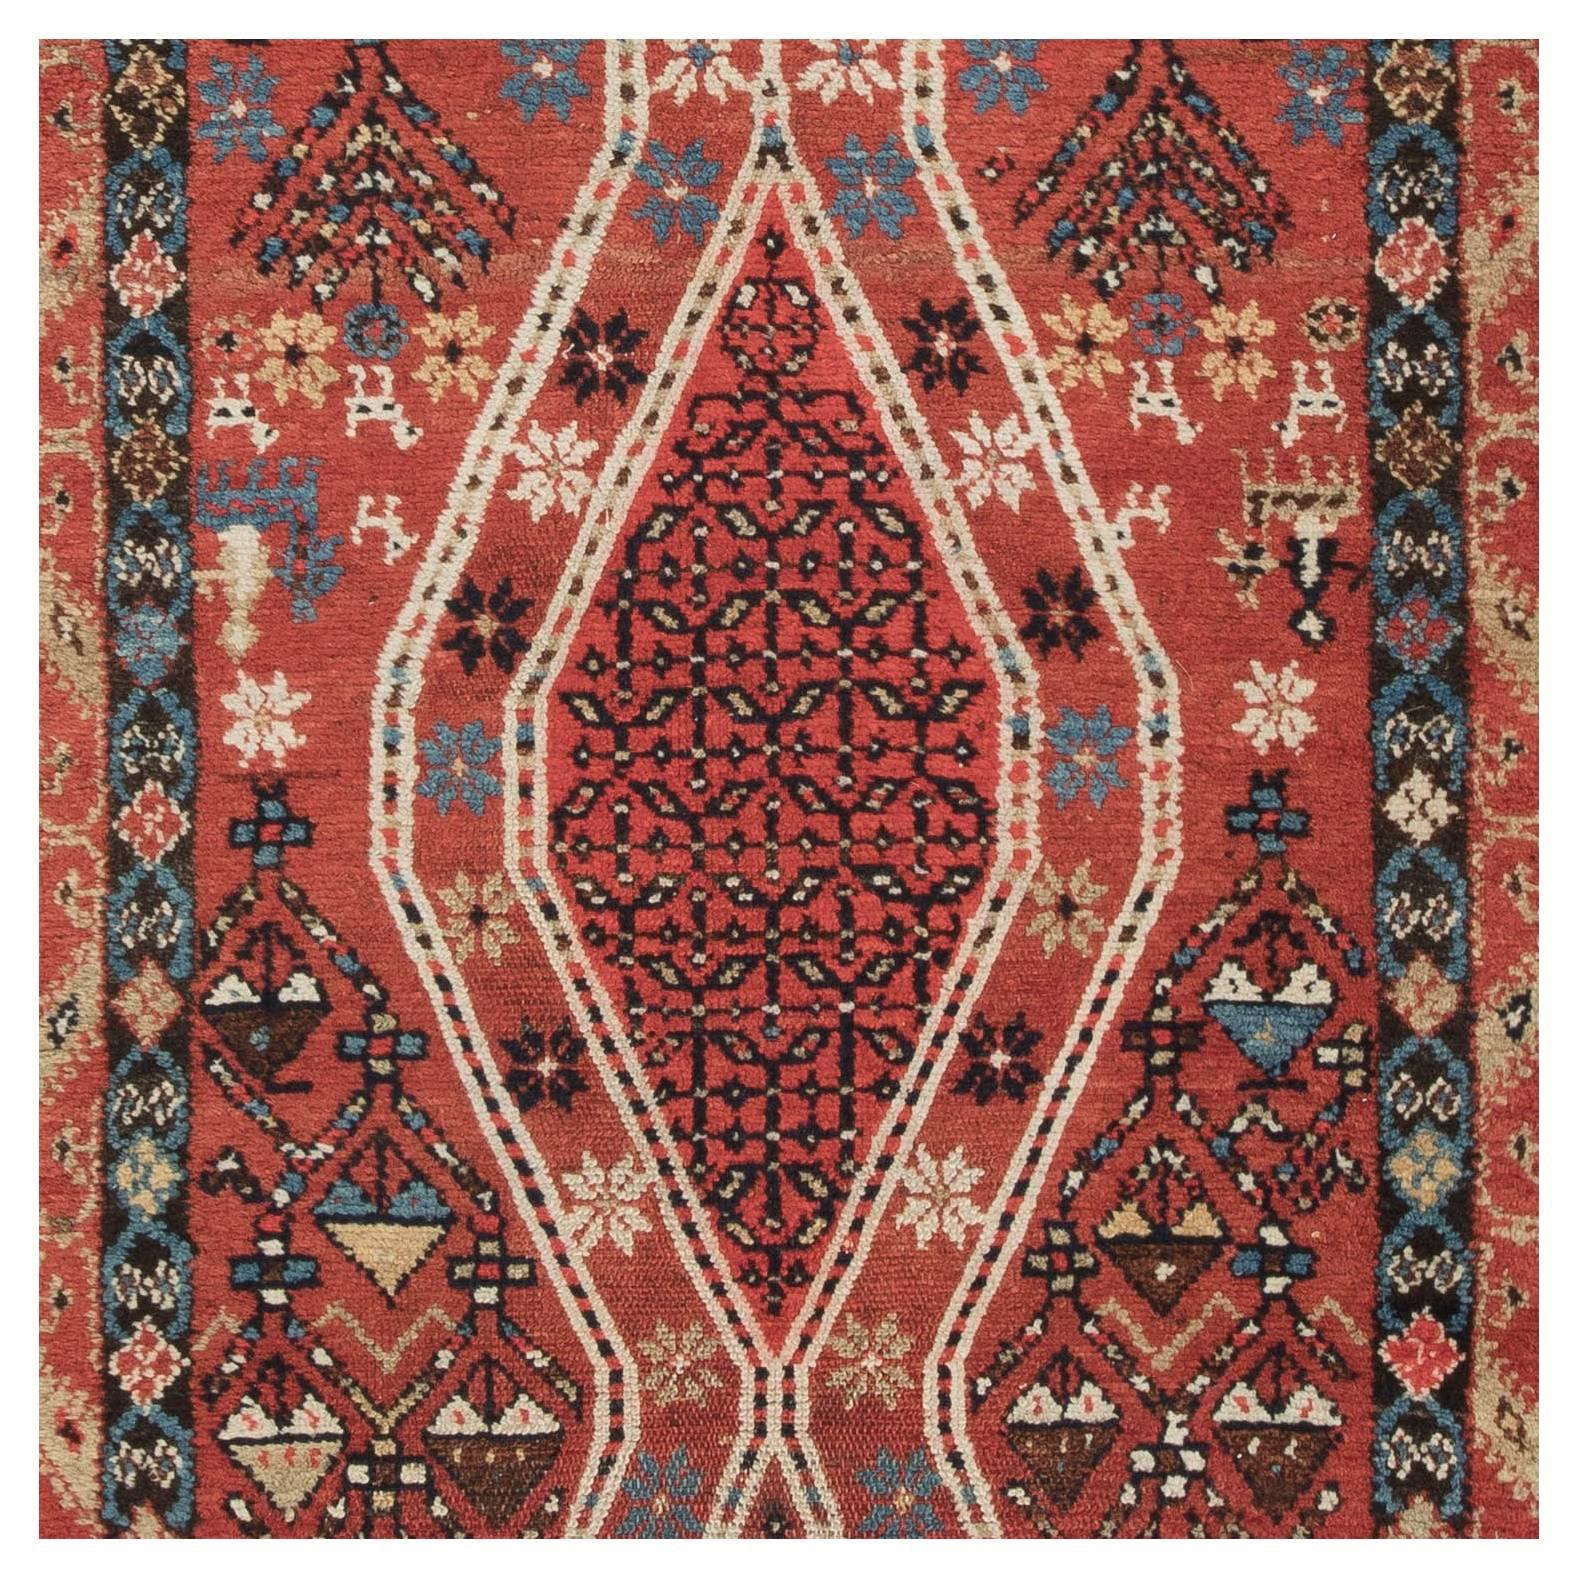 Handwoven Hamadan wool rug in an unusual geometric style, drawing on the design influences of Northwest Persia, as well as Southern Caucasian style elements and the occasional use of simplified animals and flowers. This elegant runner features pure